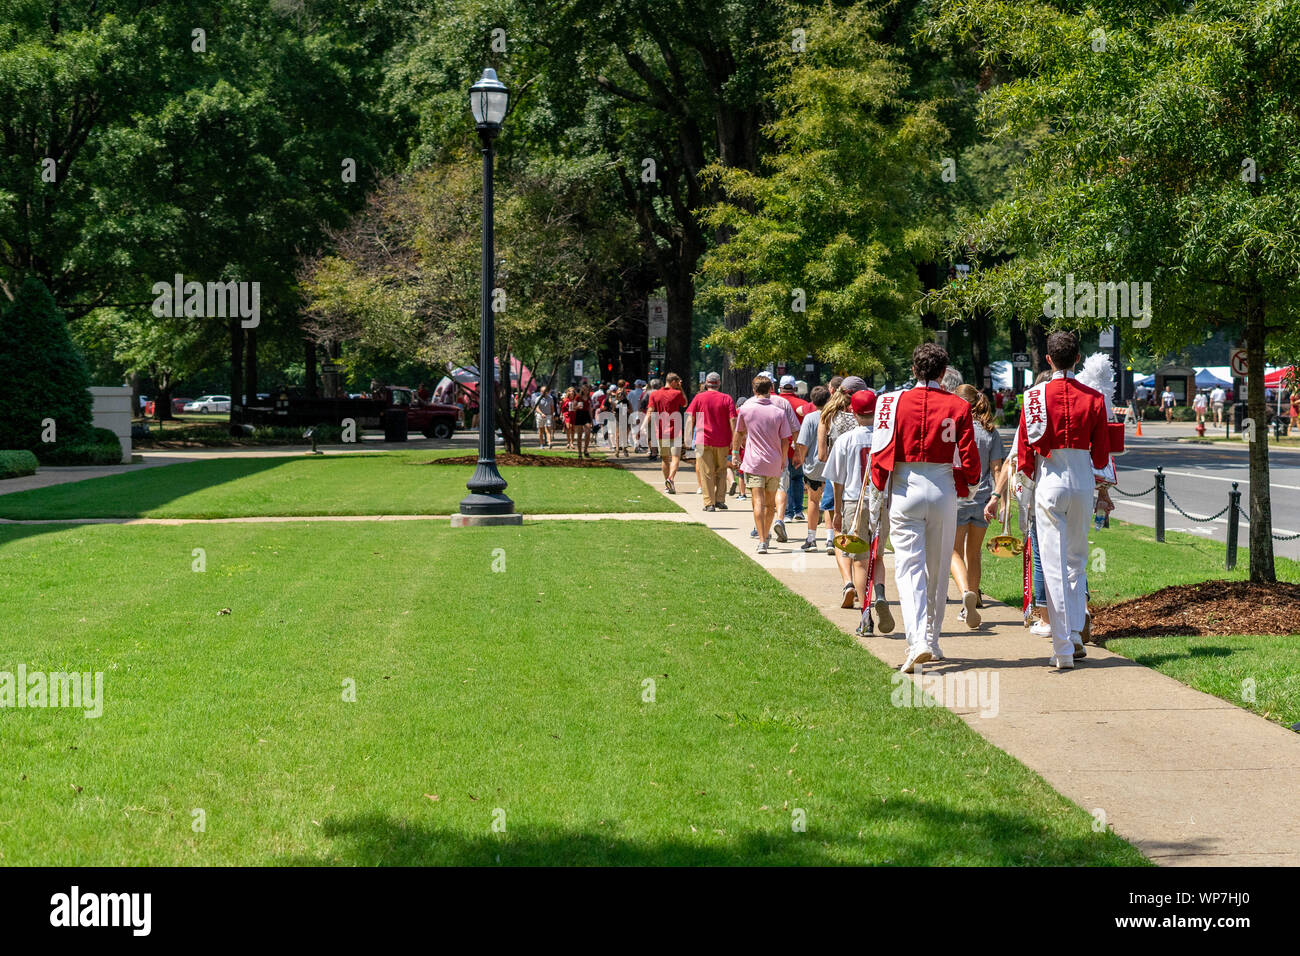 Tuscaloosa, Alabama, USA. 7th Sep, 2019. The sidewalks on the campus of the University of Alabama were full of football fans and band members walking about two miles to the stadium. The people were in Tuscaloosa, Alabama on Saturday, September 7th, 2019 for the Alabama vs New Mexico game. (Credit Image: © Tim ThompsonZUMA Wire) Stock Photo